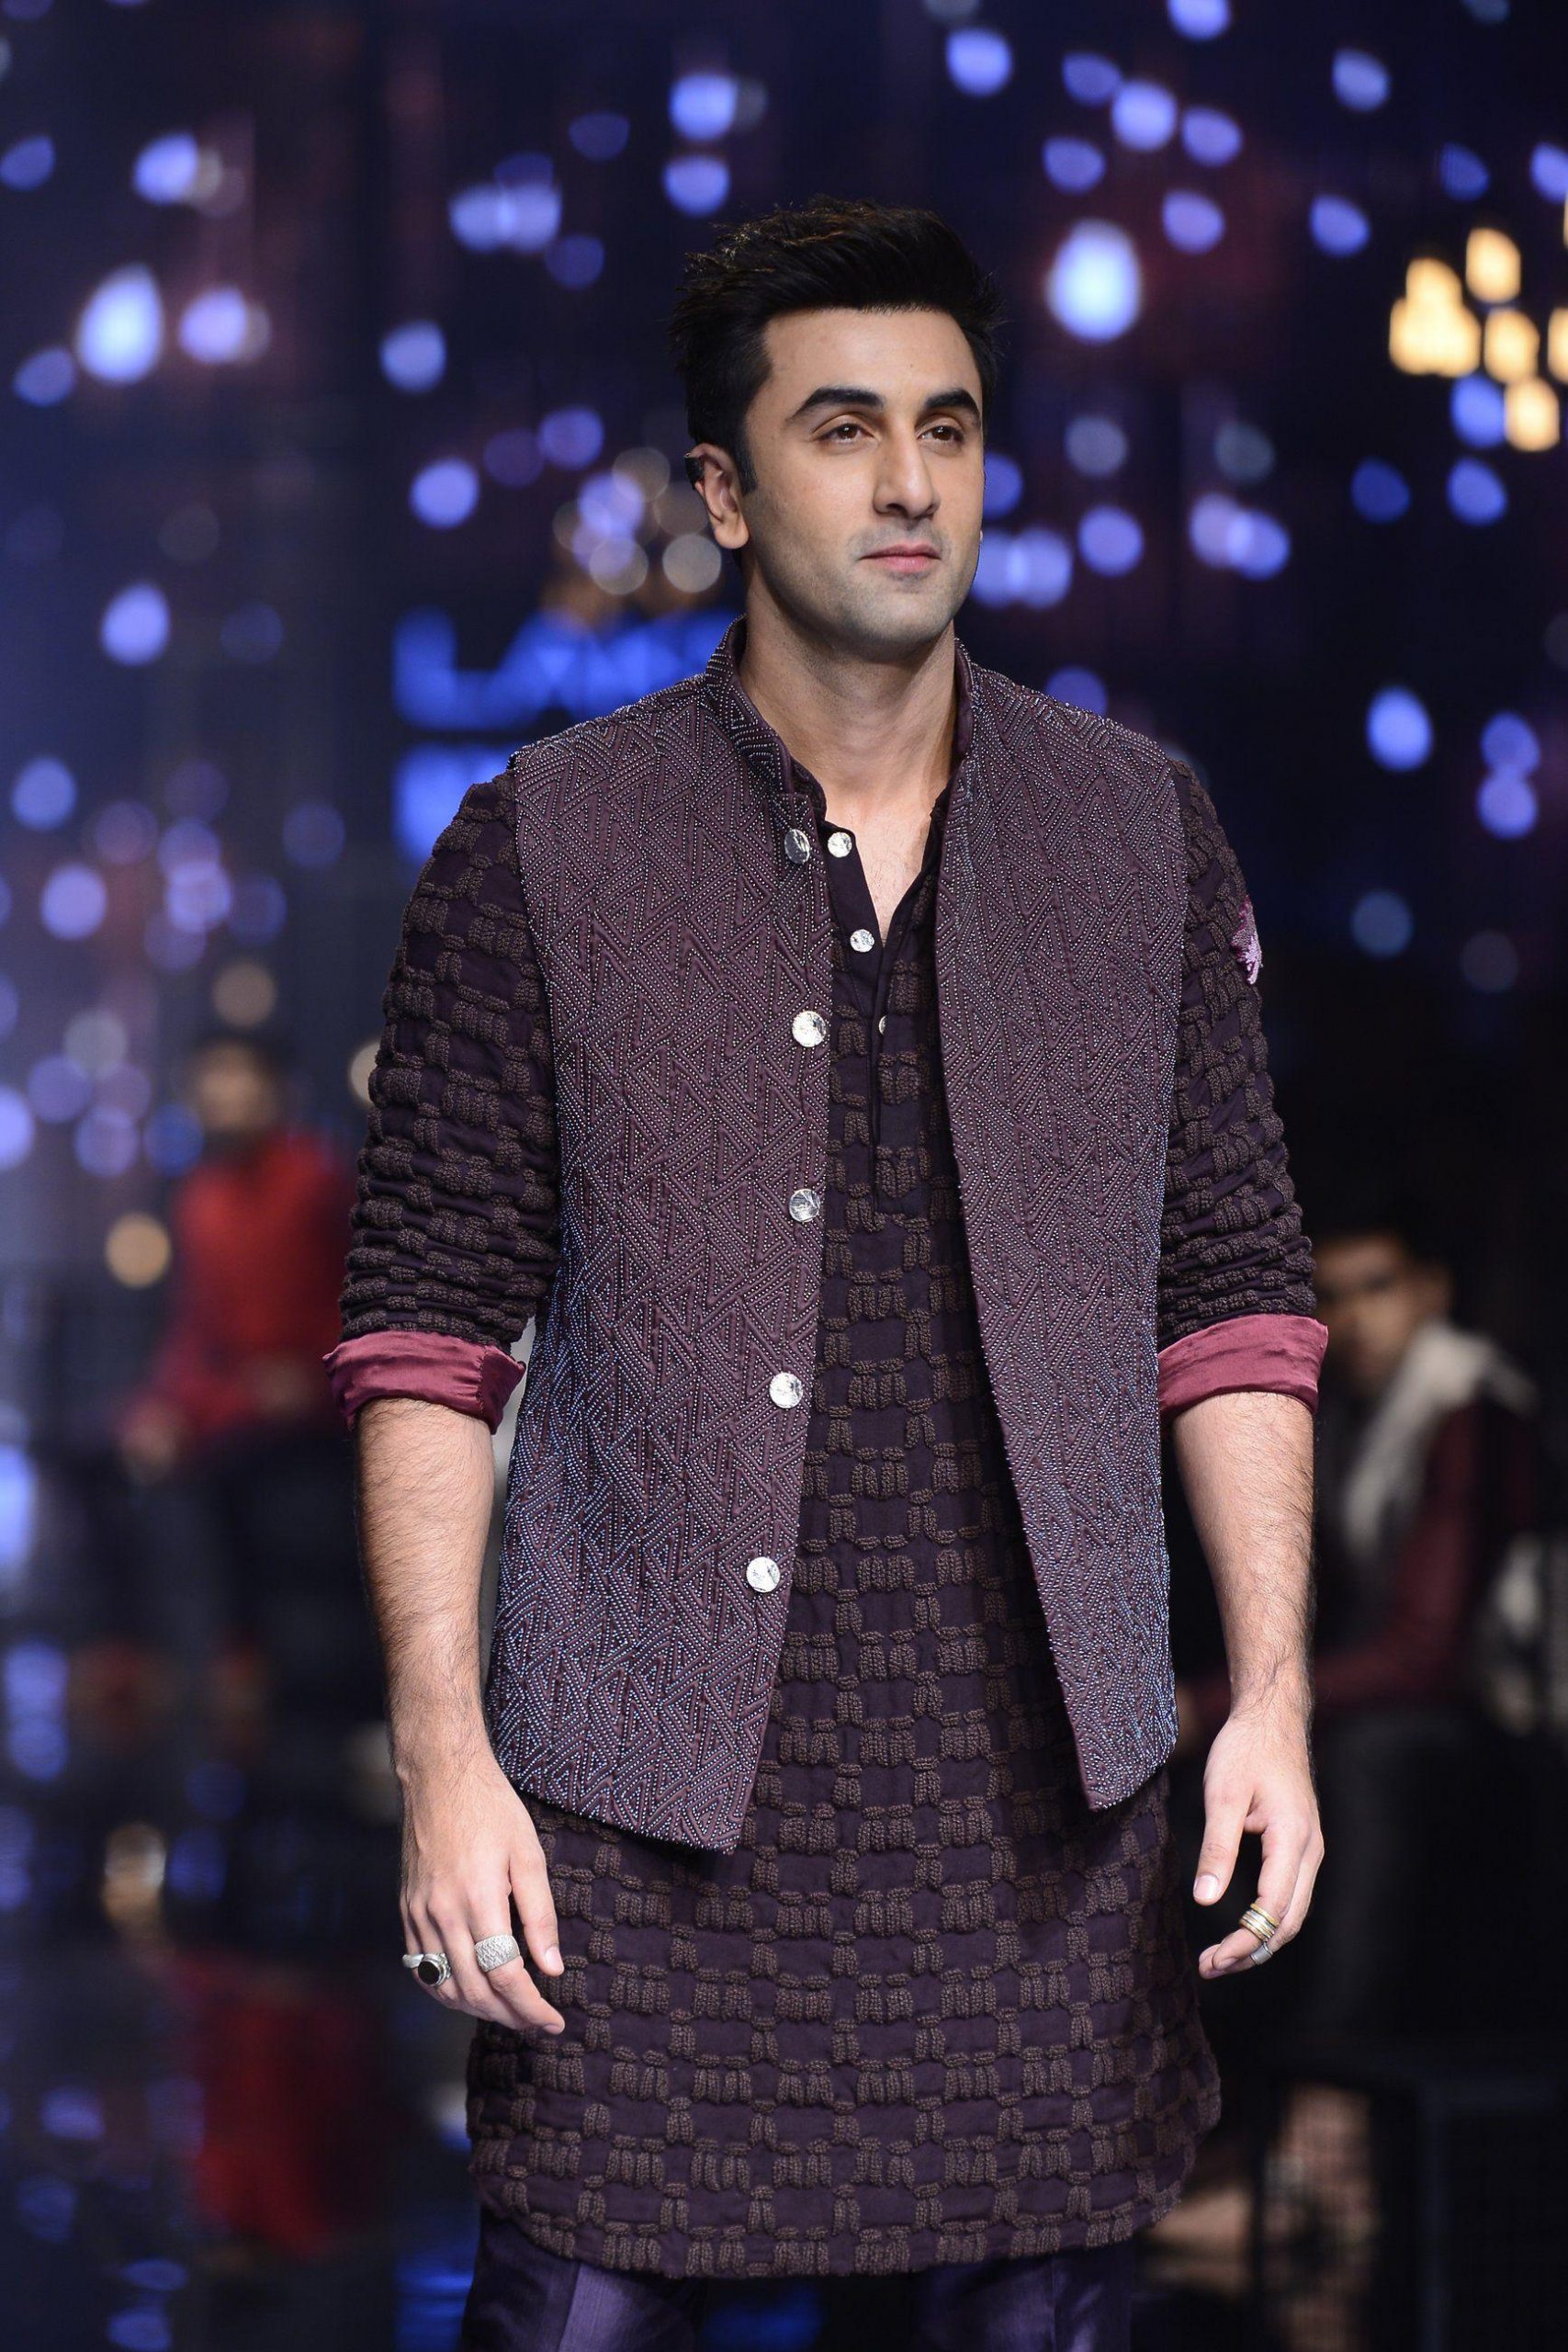 Ranbir Kapoor Turns Heads as the Showstopper at Fashion Show